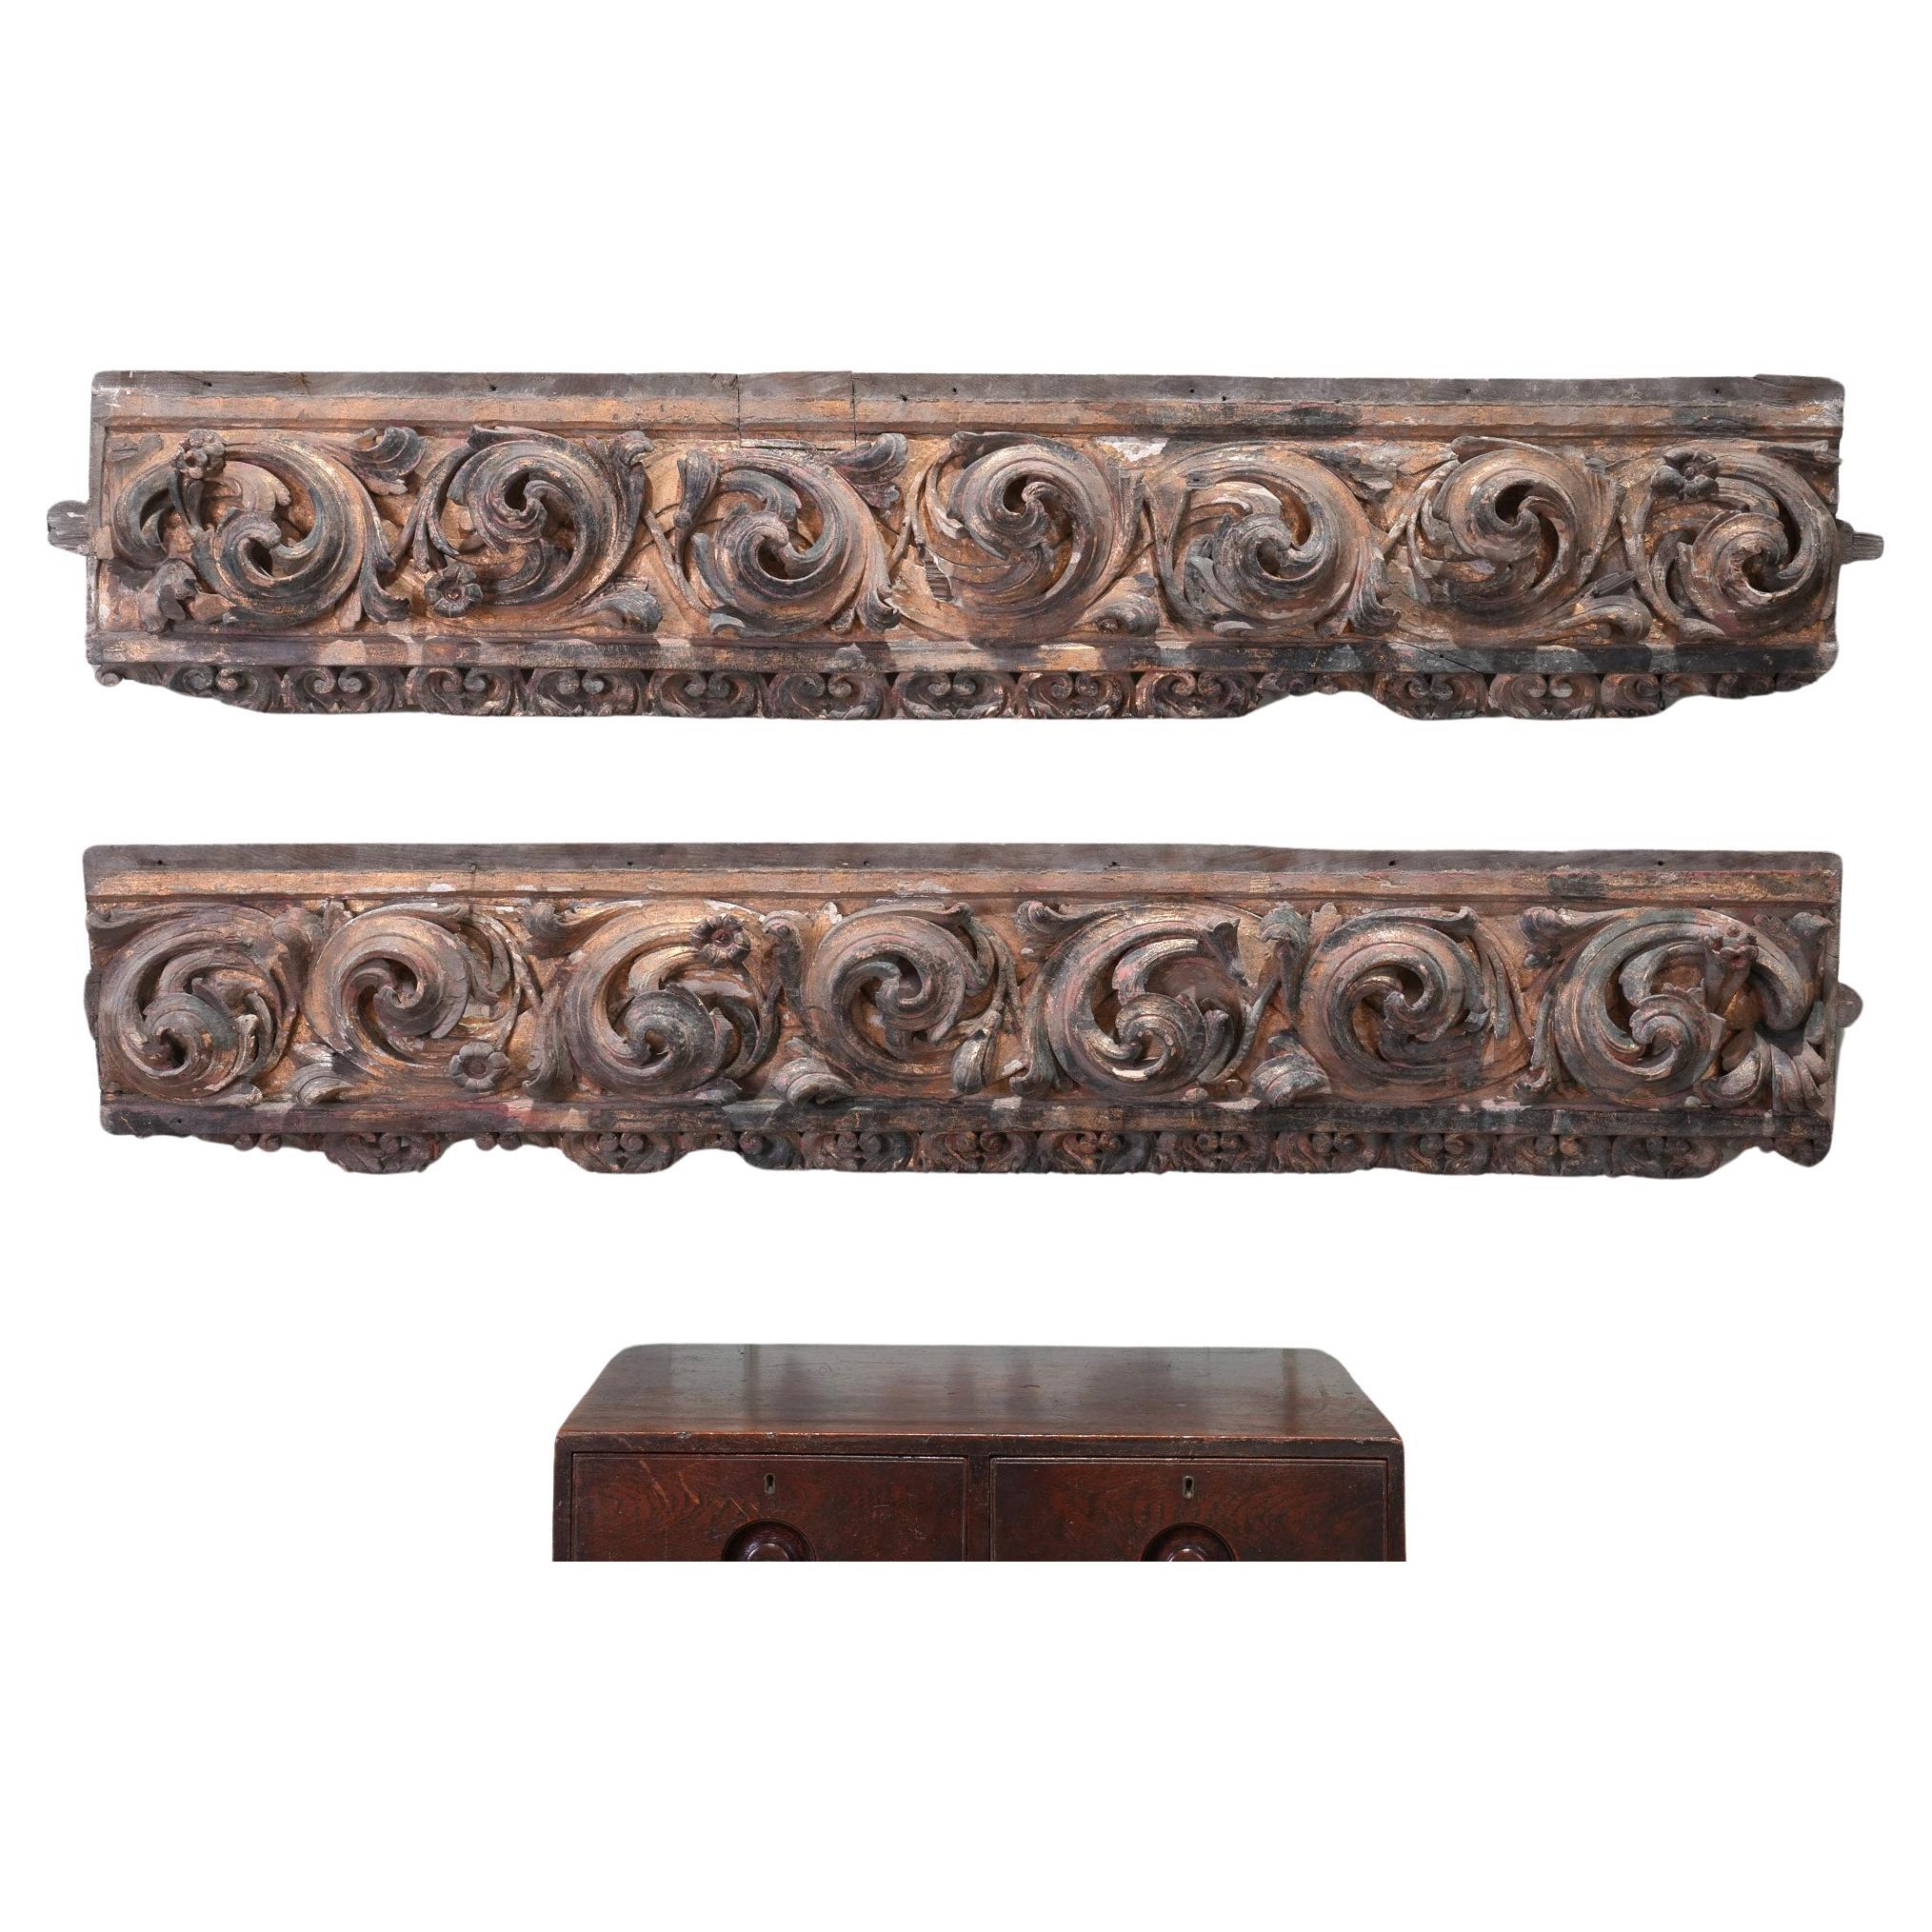 A Pair of 18th Century Portuguese Baroque Wall Panels For Sale